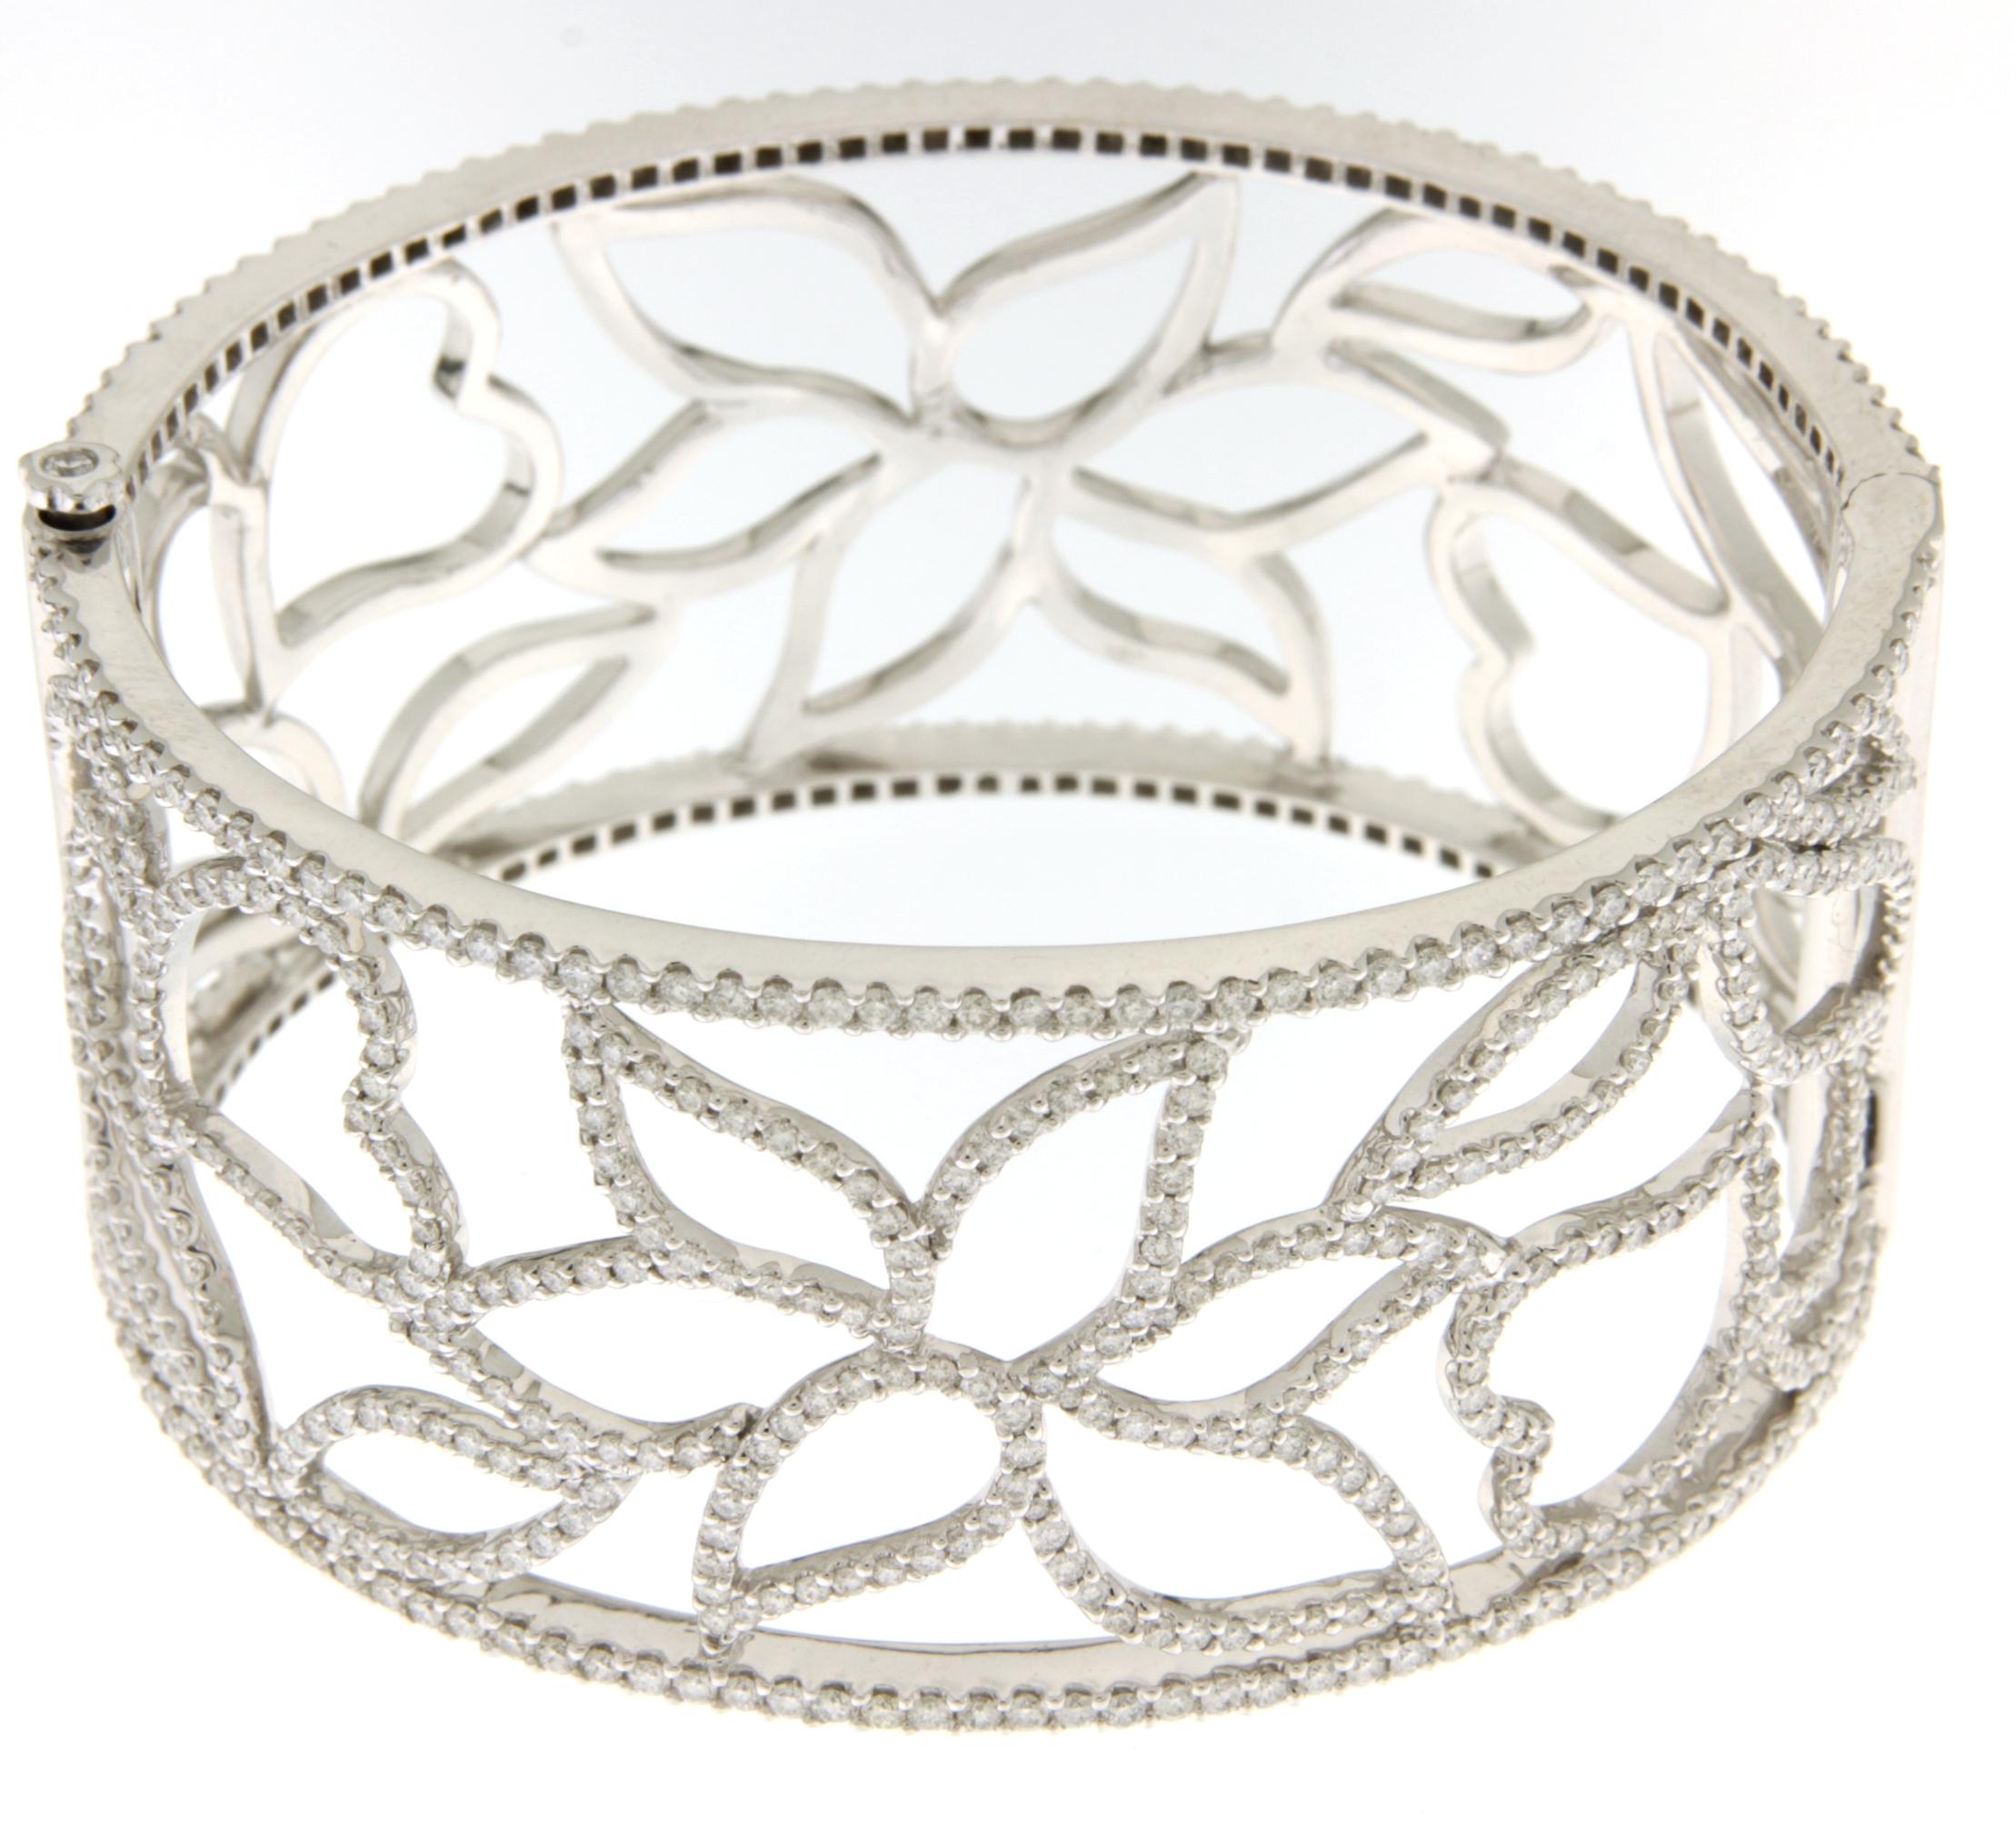 Brilliant Cut 18kt White Gold Cuff Bracelet with 5.78ct Diamonds, 2 Sided Wearable For Sale